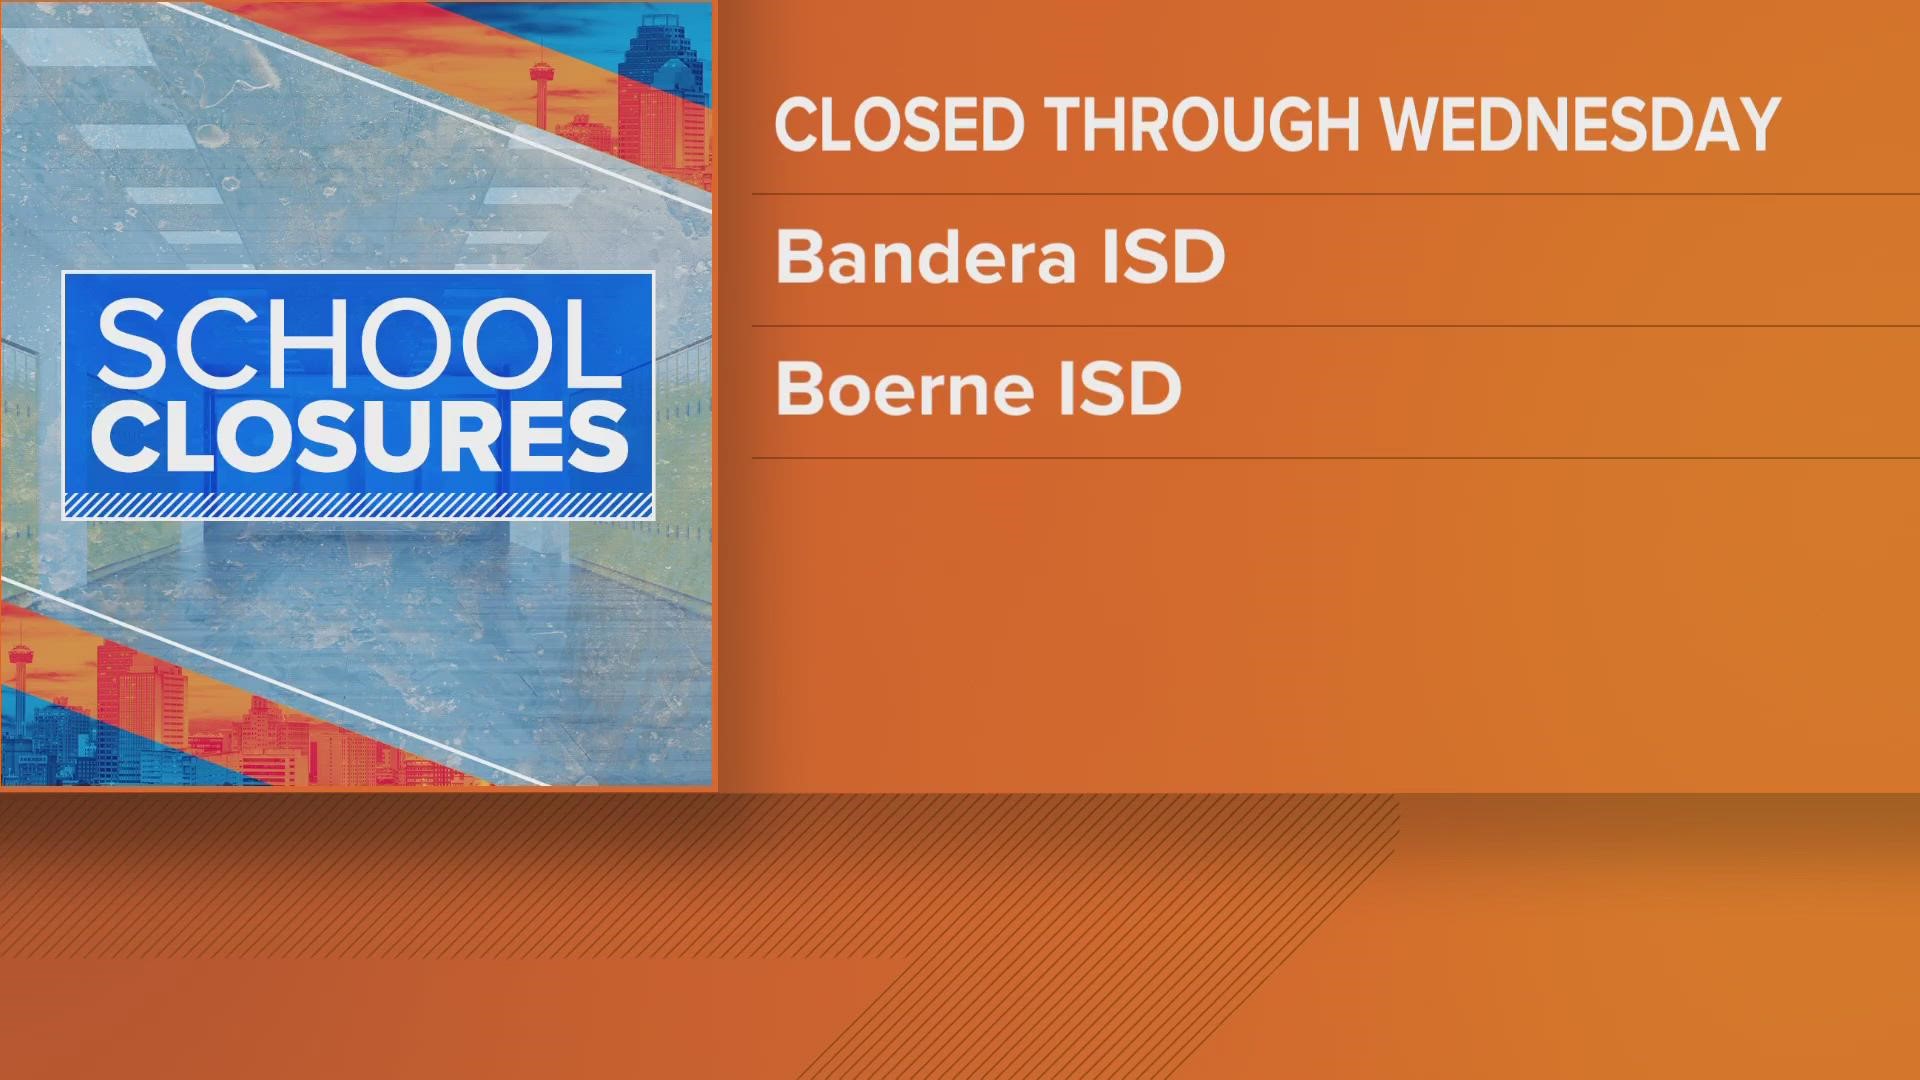 Here's a look at the current status of school districts in the San Antonio area and across South Texas.